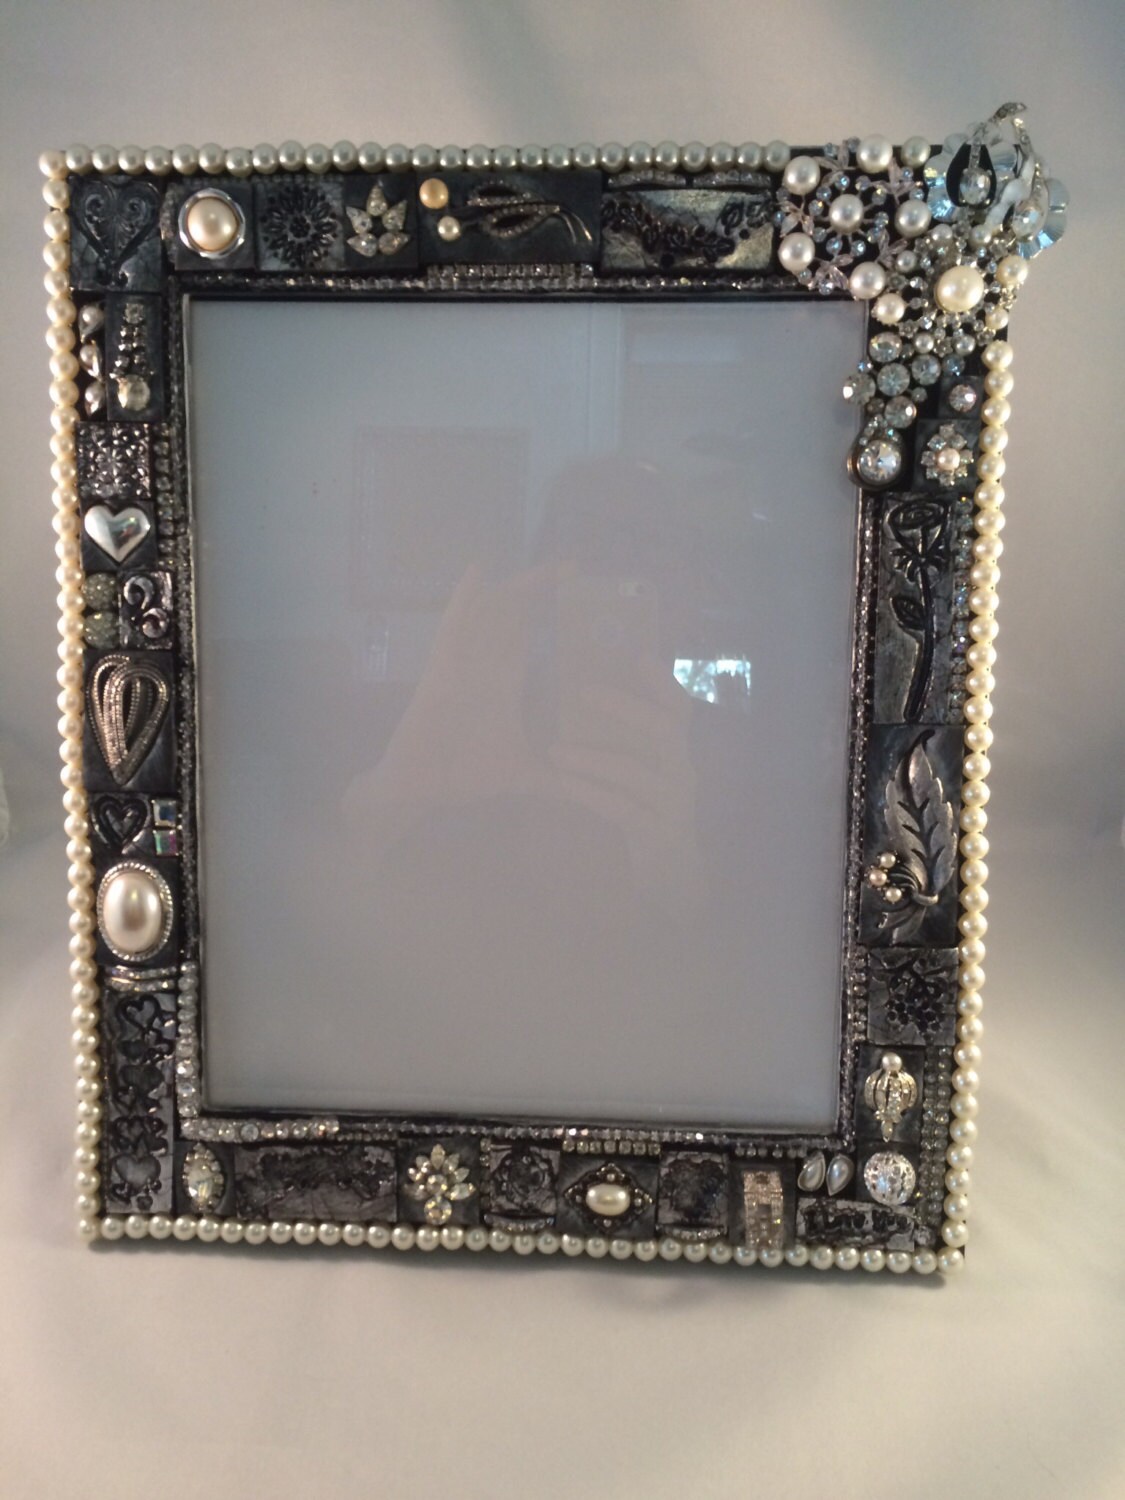 8x10 Elegant Picture Frame With Vintage Jewelry And By Bubbalouies